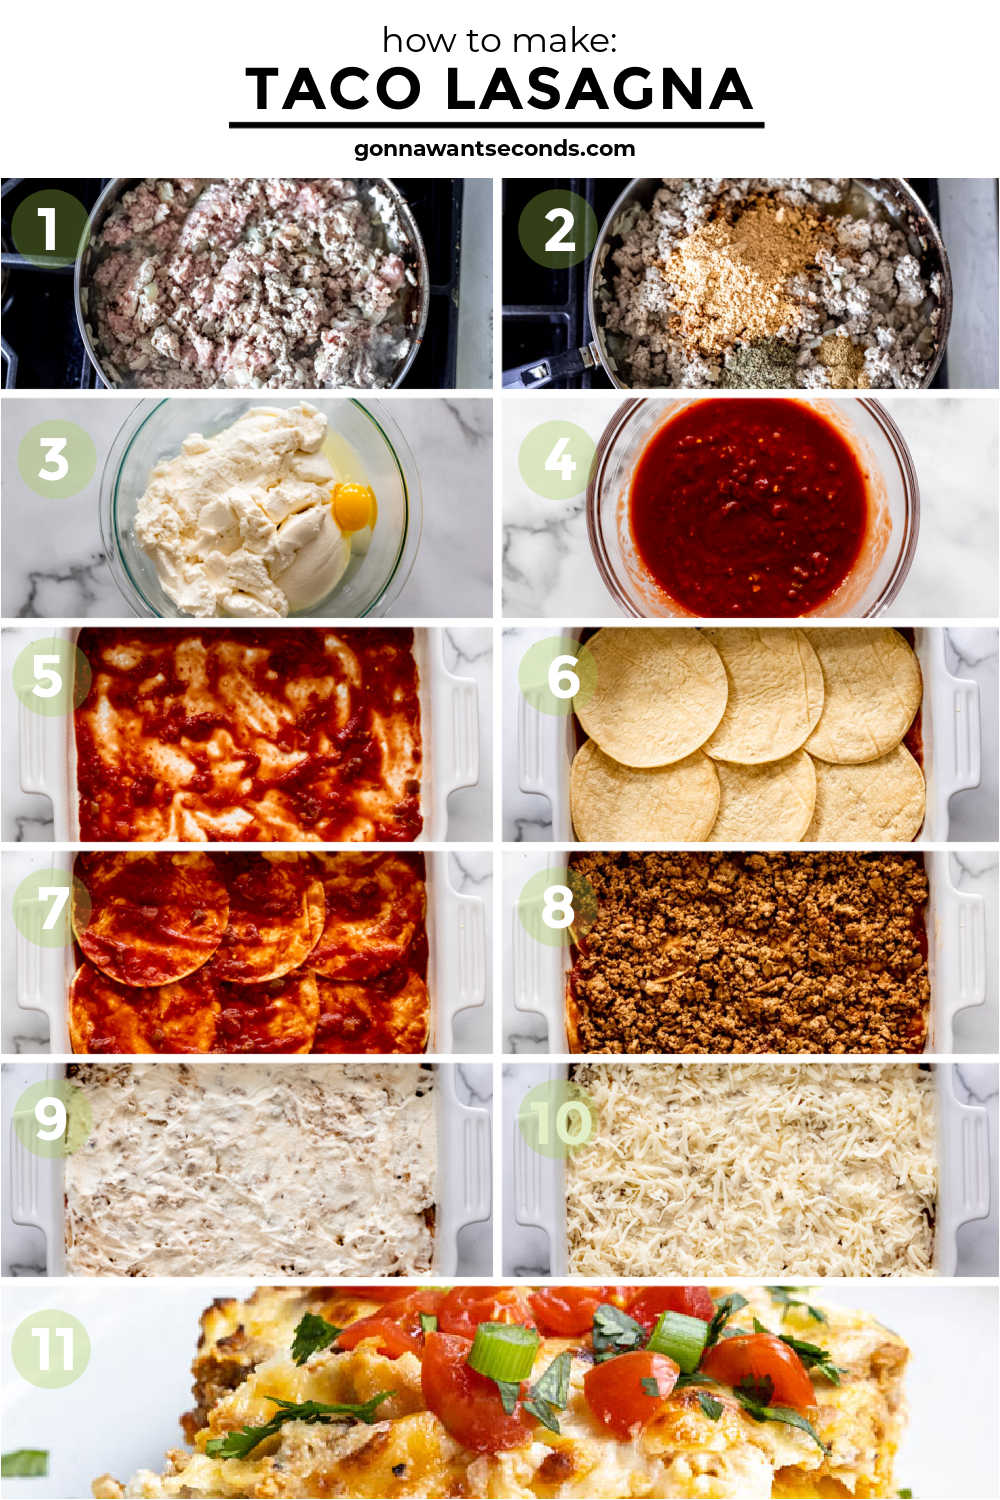 step by step how to make taco lasagna